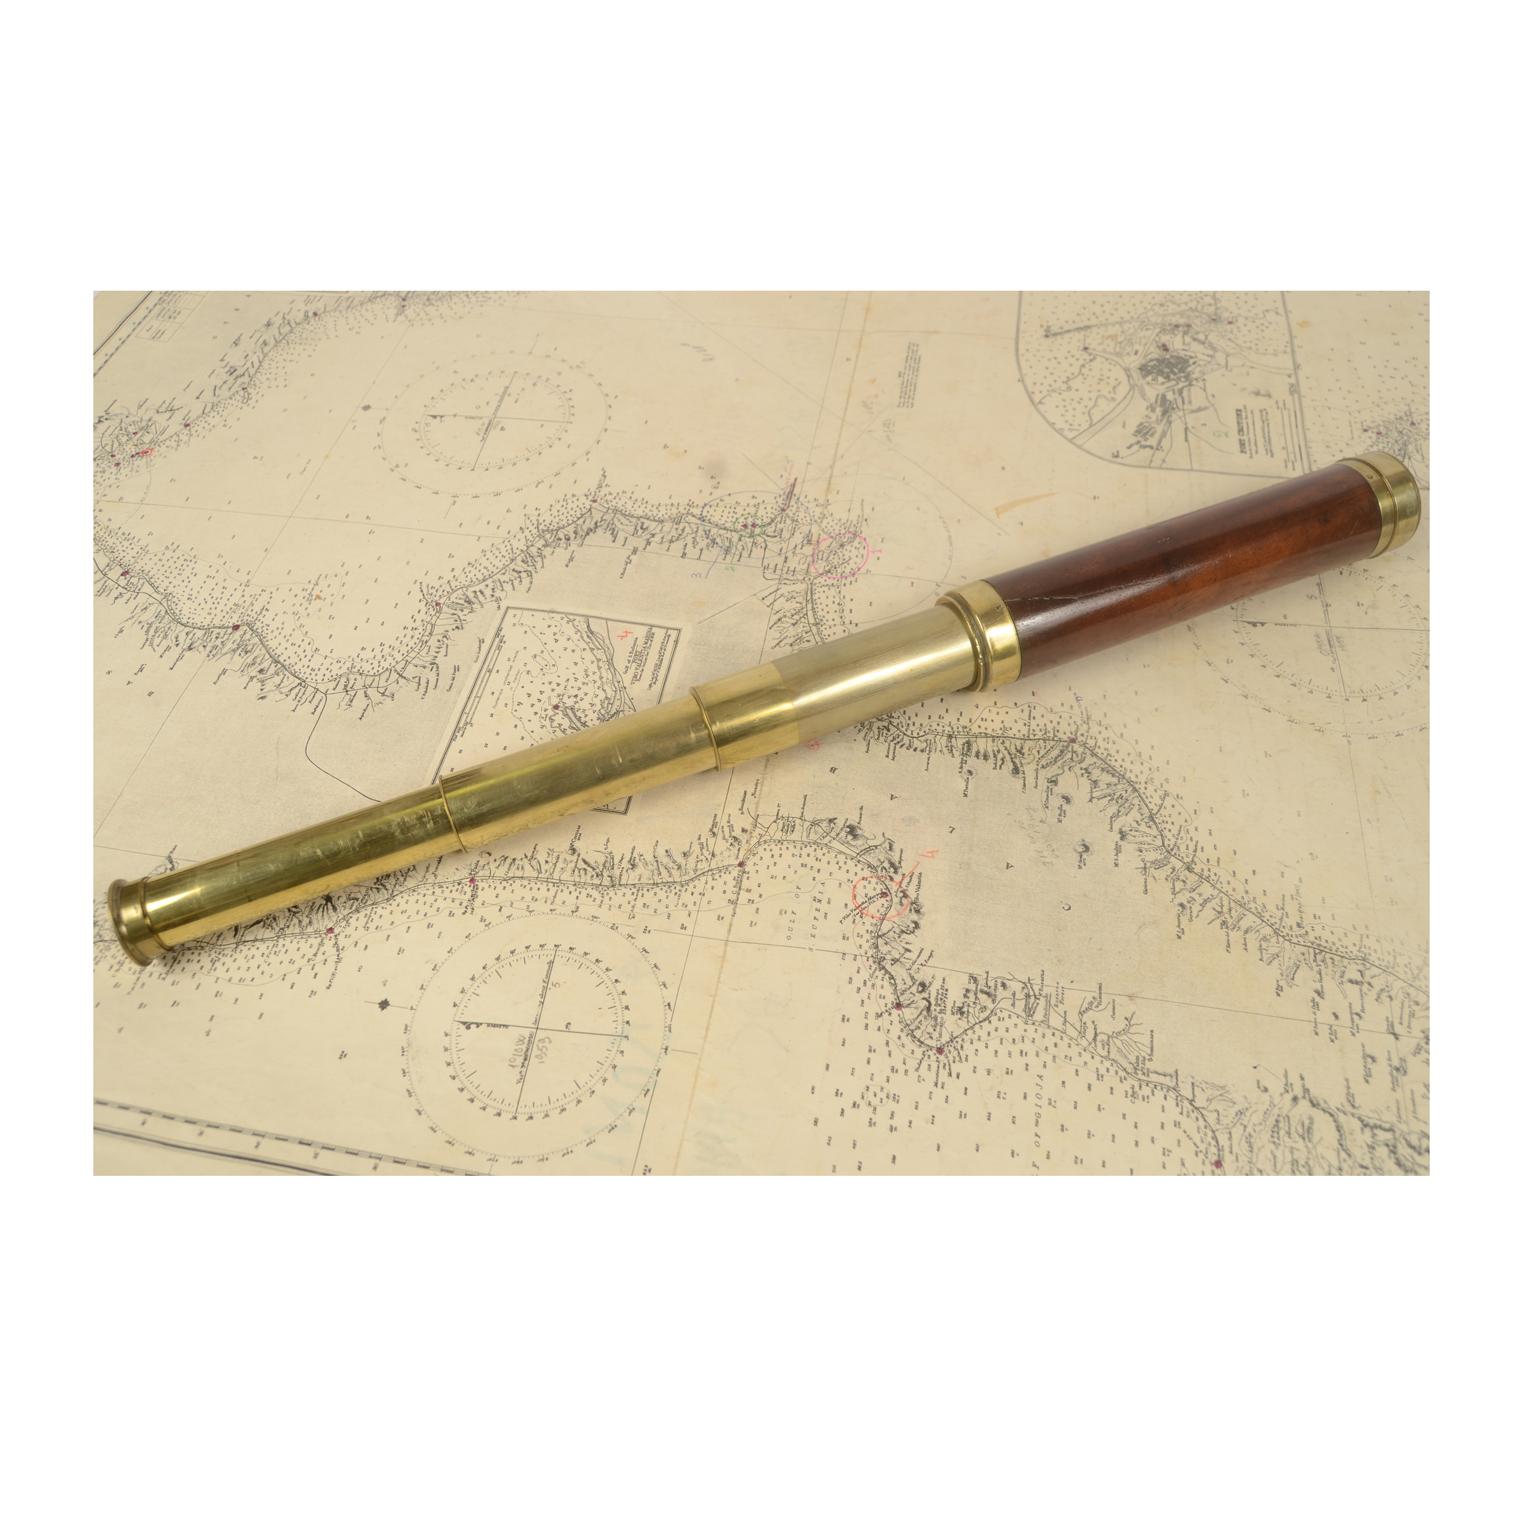 Brass telescope with mahogany handle, English manufacture, early 19th century.
Focus with three extensions. Maximum length 72.5 cm, minimum 23.5 cm, focal diameter 4.5 cm.
Good condition, small crack on the wood of the handle, fully functional